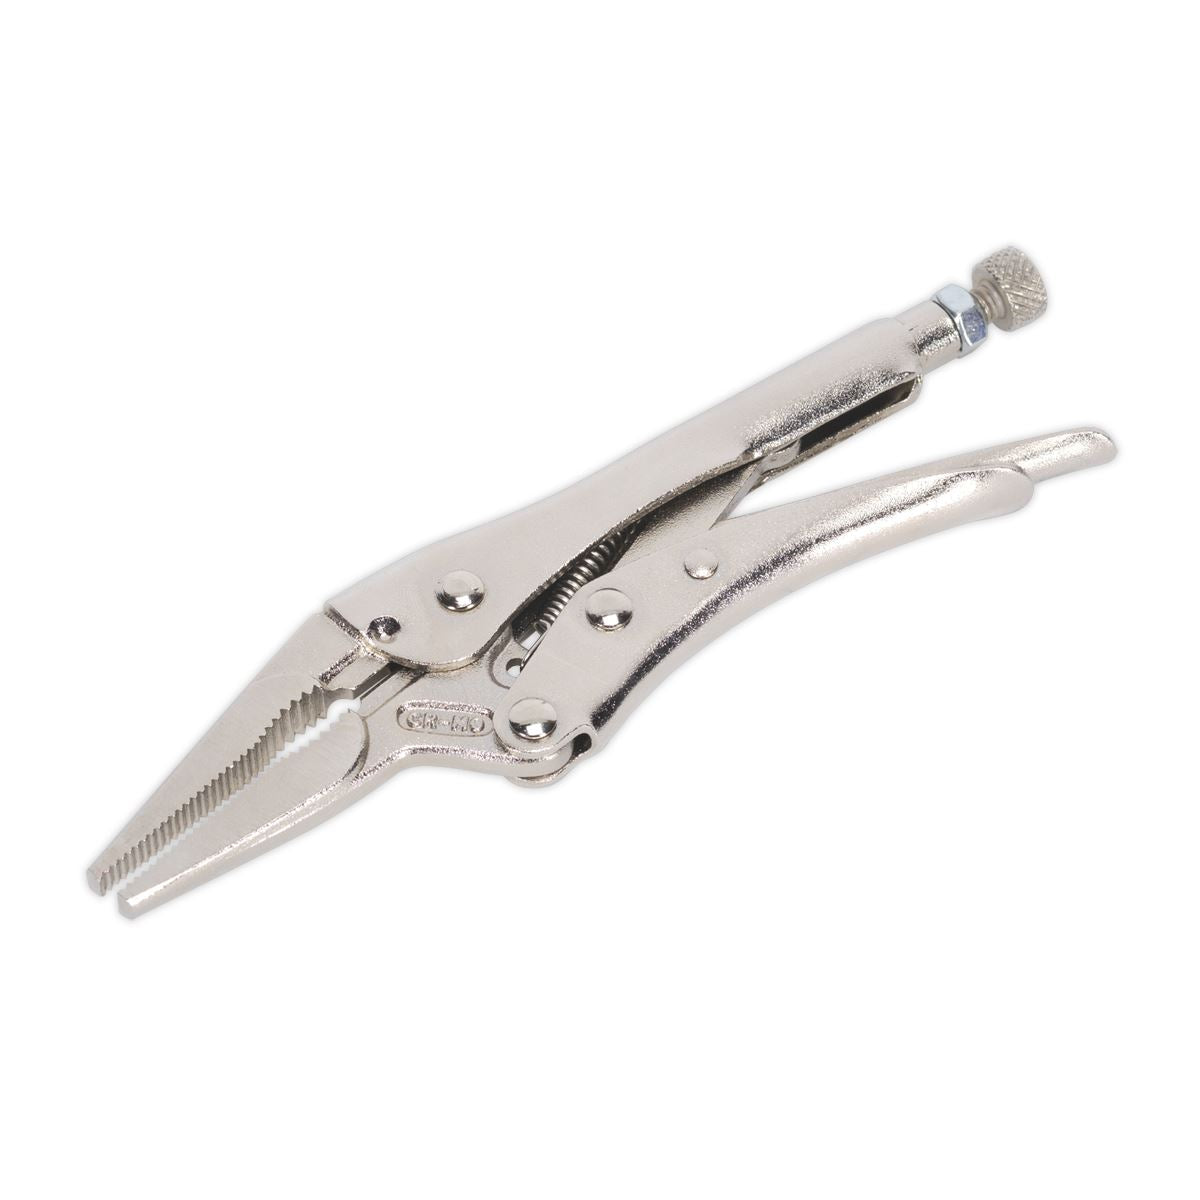 Sealey Premier Locking Pliers Long Nose 170mm 0-50mm Capacity